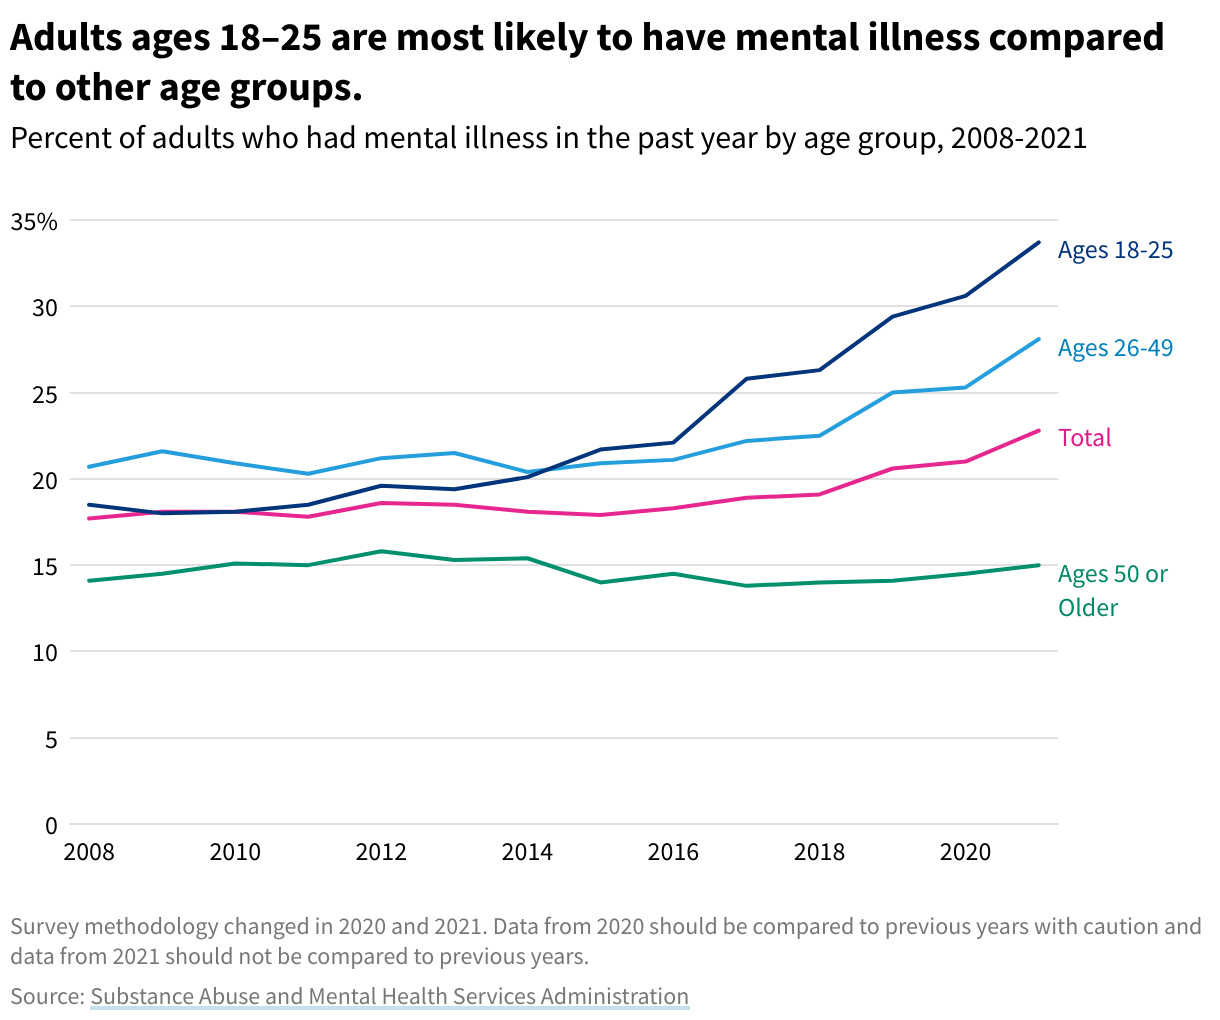 Line graph comparing age groups and likelihood of mental illness. Age group 18-25 was most likely when compared.